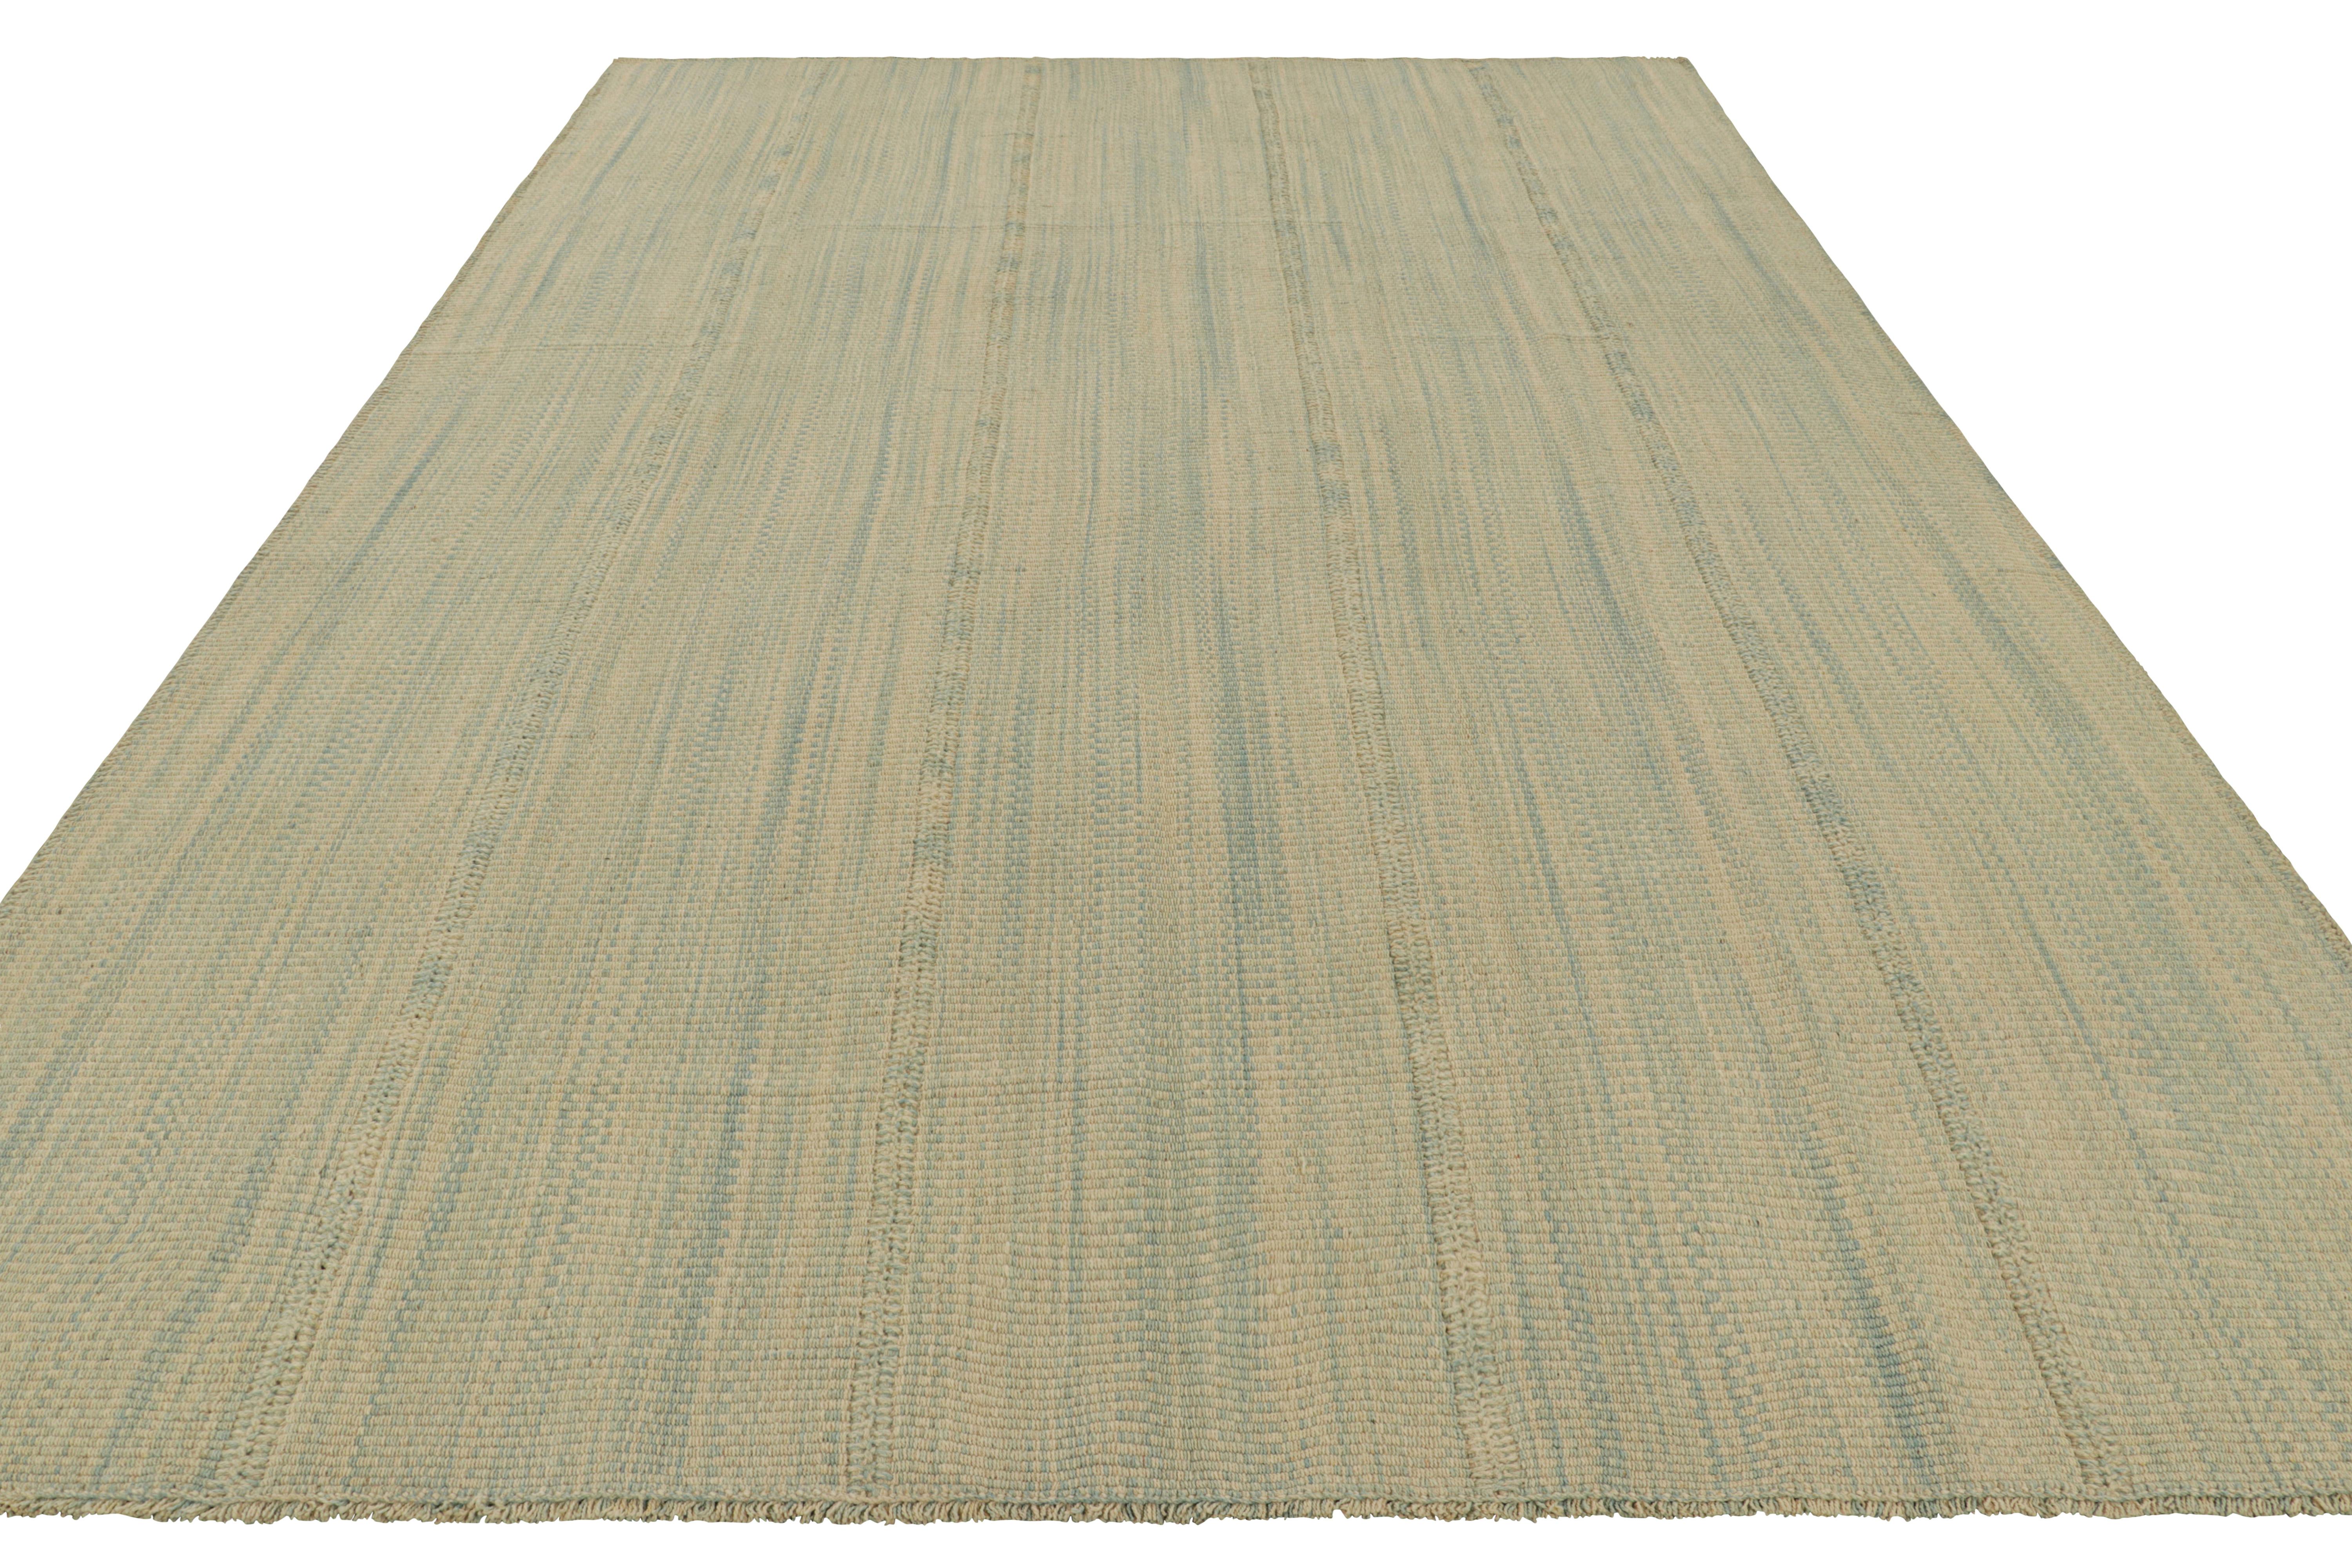 Hand-Woven Rug & Kilim’s Contemporary Kilim in Blue and Cream White Textural Stripes For Sale